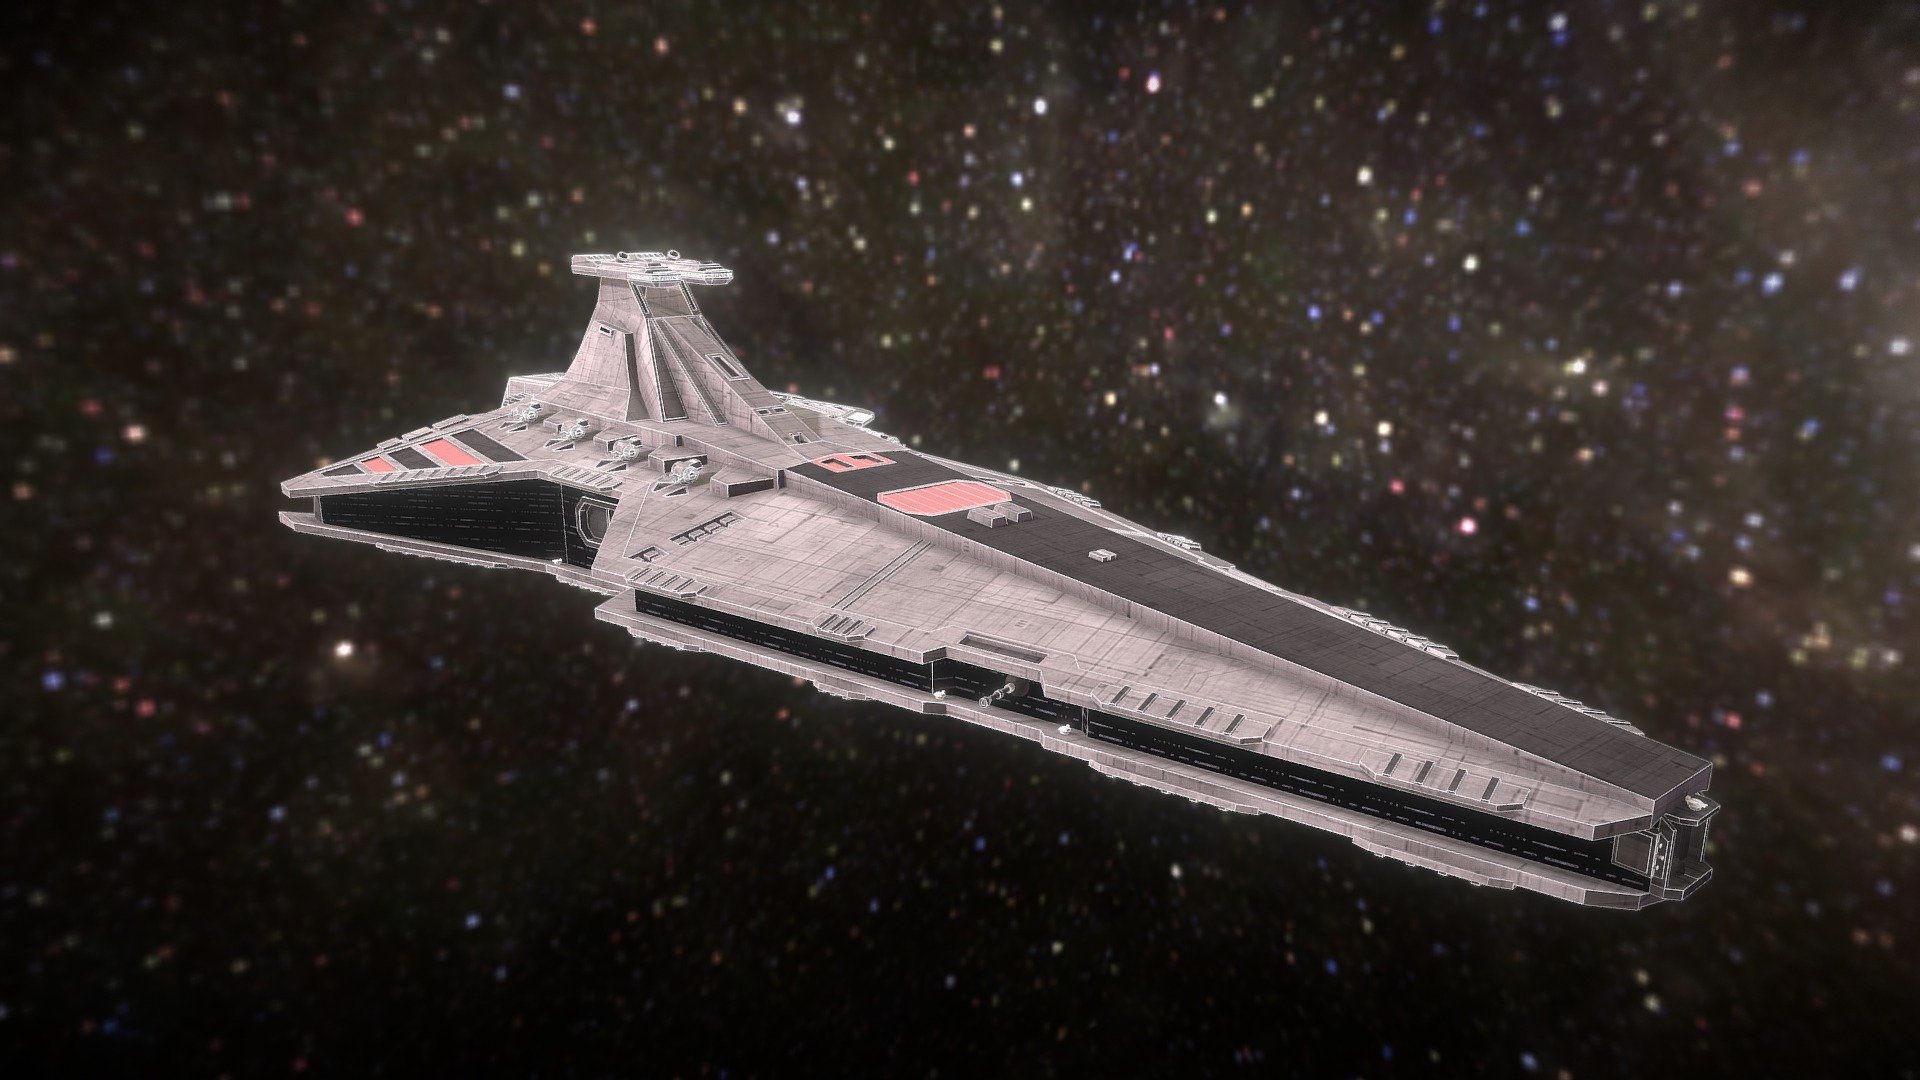 A well-built but little-known ship, the Venator-class Star Destroyer Mark II served as an intermediary design between the Venator Mark I and the later Imperial class. It was more of a test-bed to try out new design ideas than as a dedicated warship of the Republic 3d model